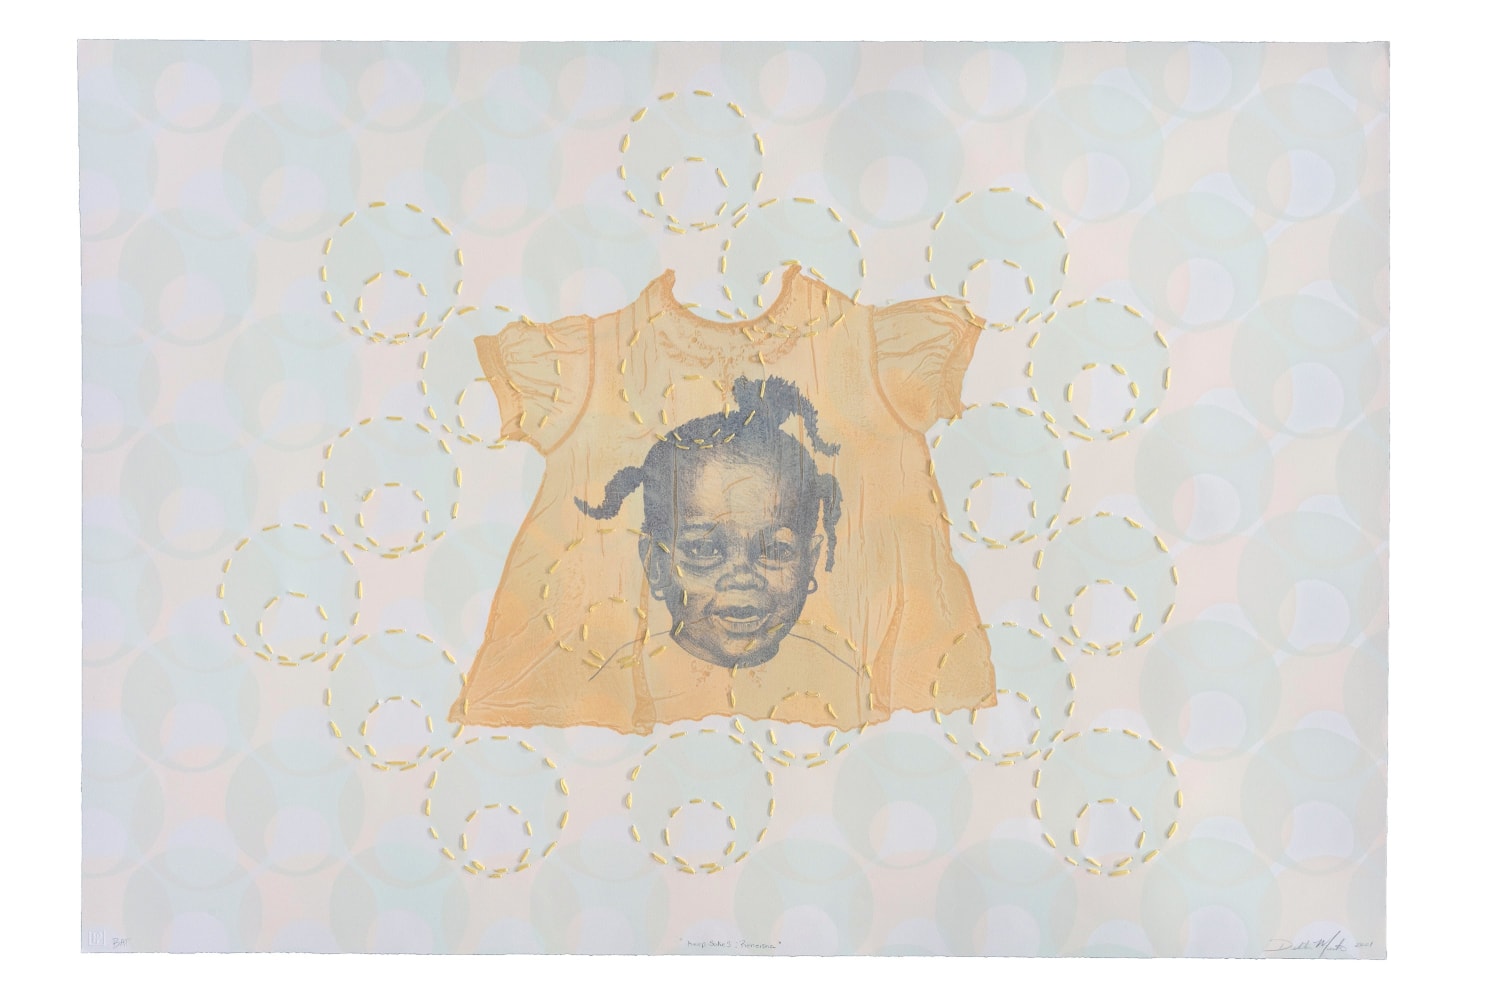 Reneisha&amp;nbsp;
Delita Martin, 2021&amp;nbsp;

Lithography with collagraph and hand stitching
29&amp;quot; x 41 &amp;frac12;&amp;quot;&amp;nbsp;
Edition of 20
$3,500; (Contact for suite price)&amp;nbsp;

Printed and Published by&amp;nbsp;Highpoint Editions&amp;nbsp;

INQUIRE

&amp;nbsp;

&amp;nbsp;